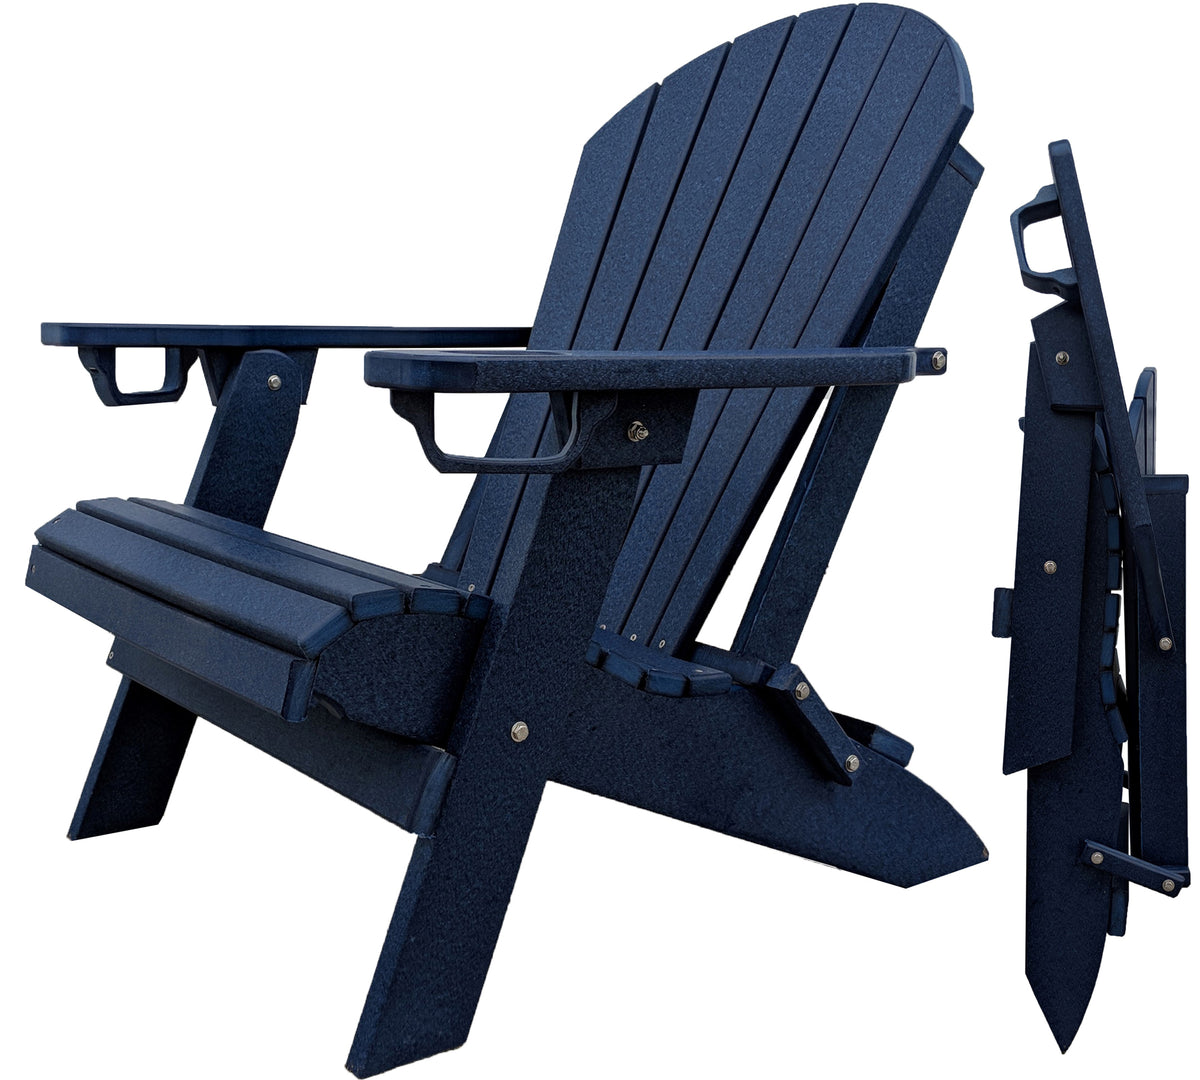 Unwind Edition Built-in cup holder Folding Poly Adirondack Chair 